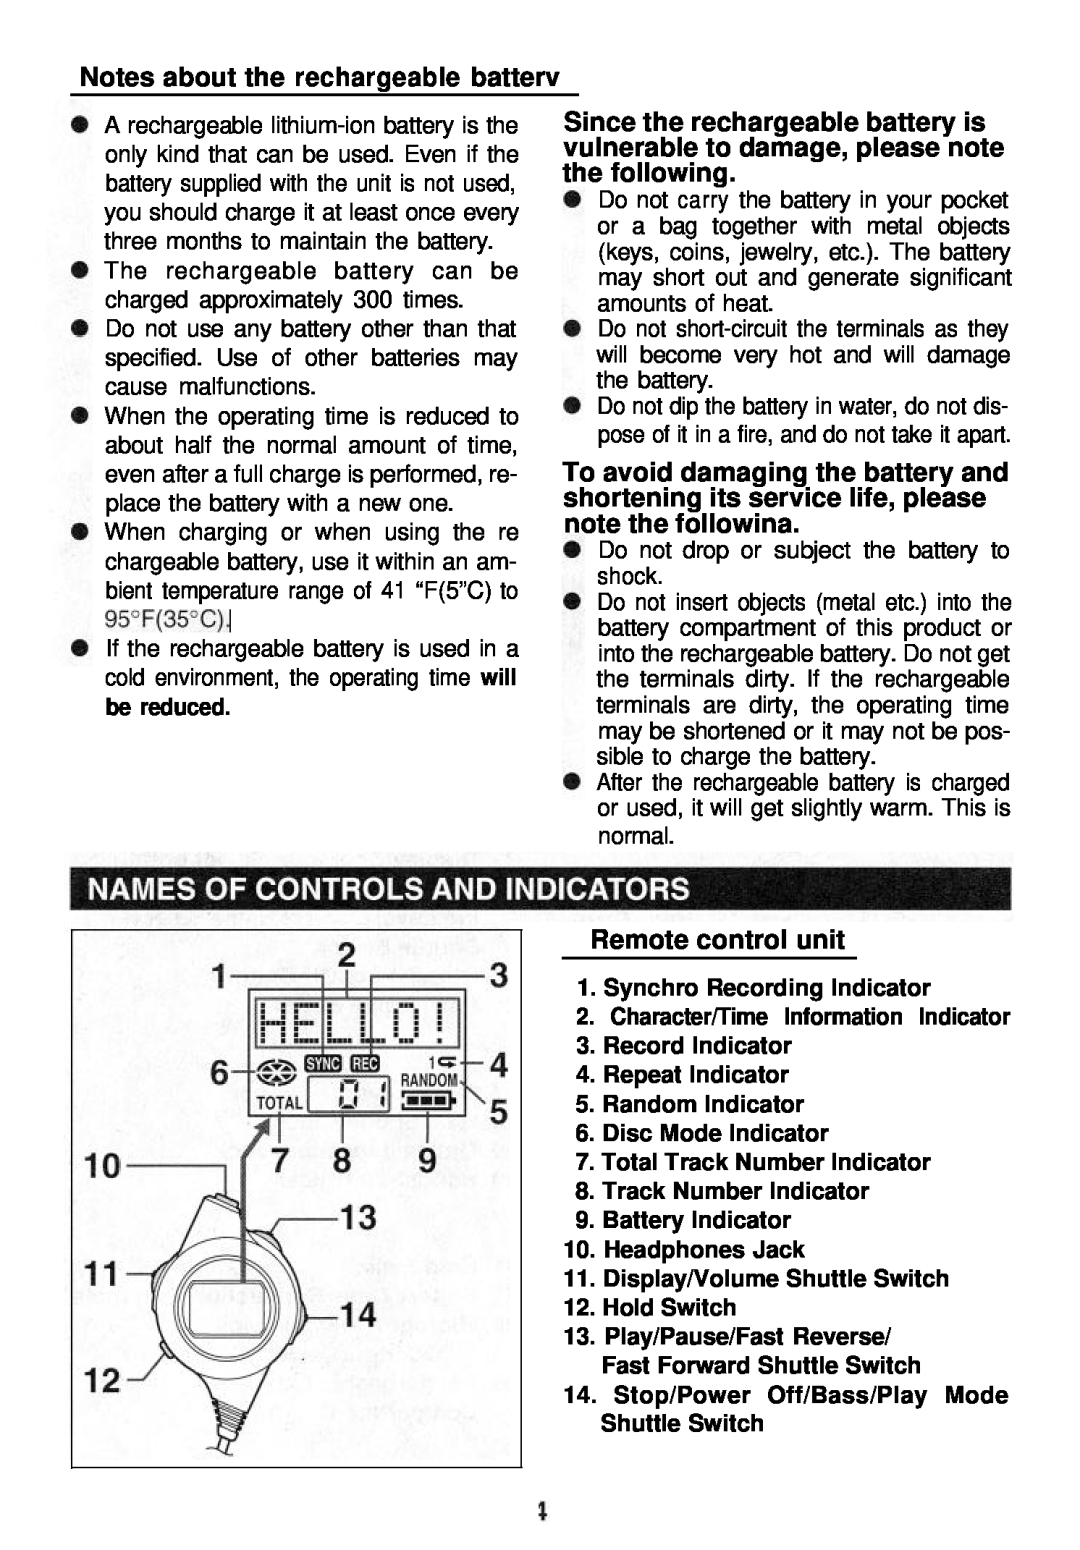 Sharp MD-MT821 manual Notes about the rechargeable batterv, W Remote control unit 